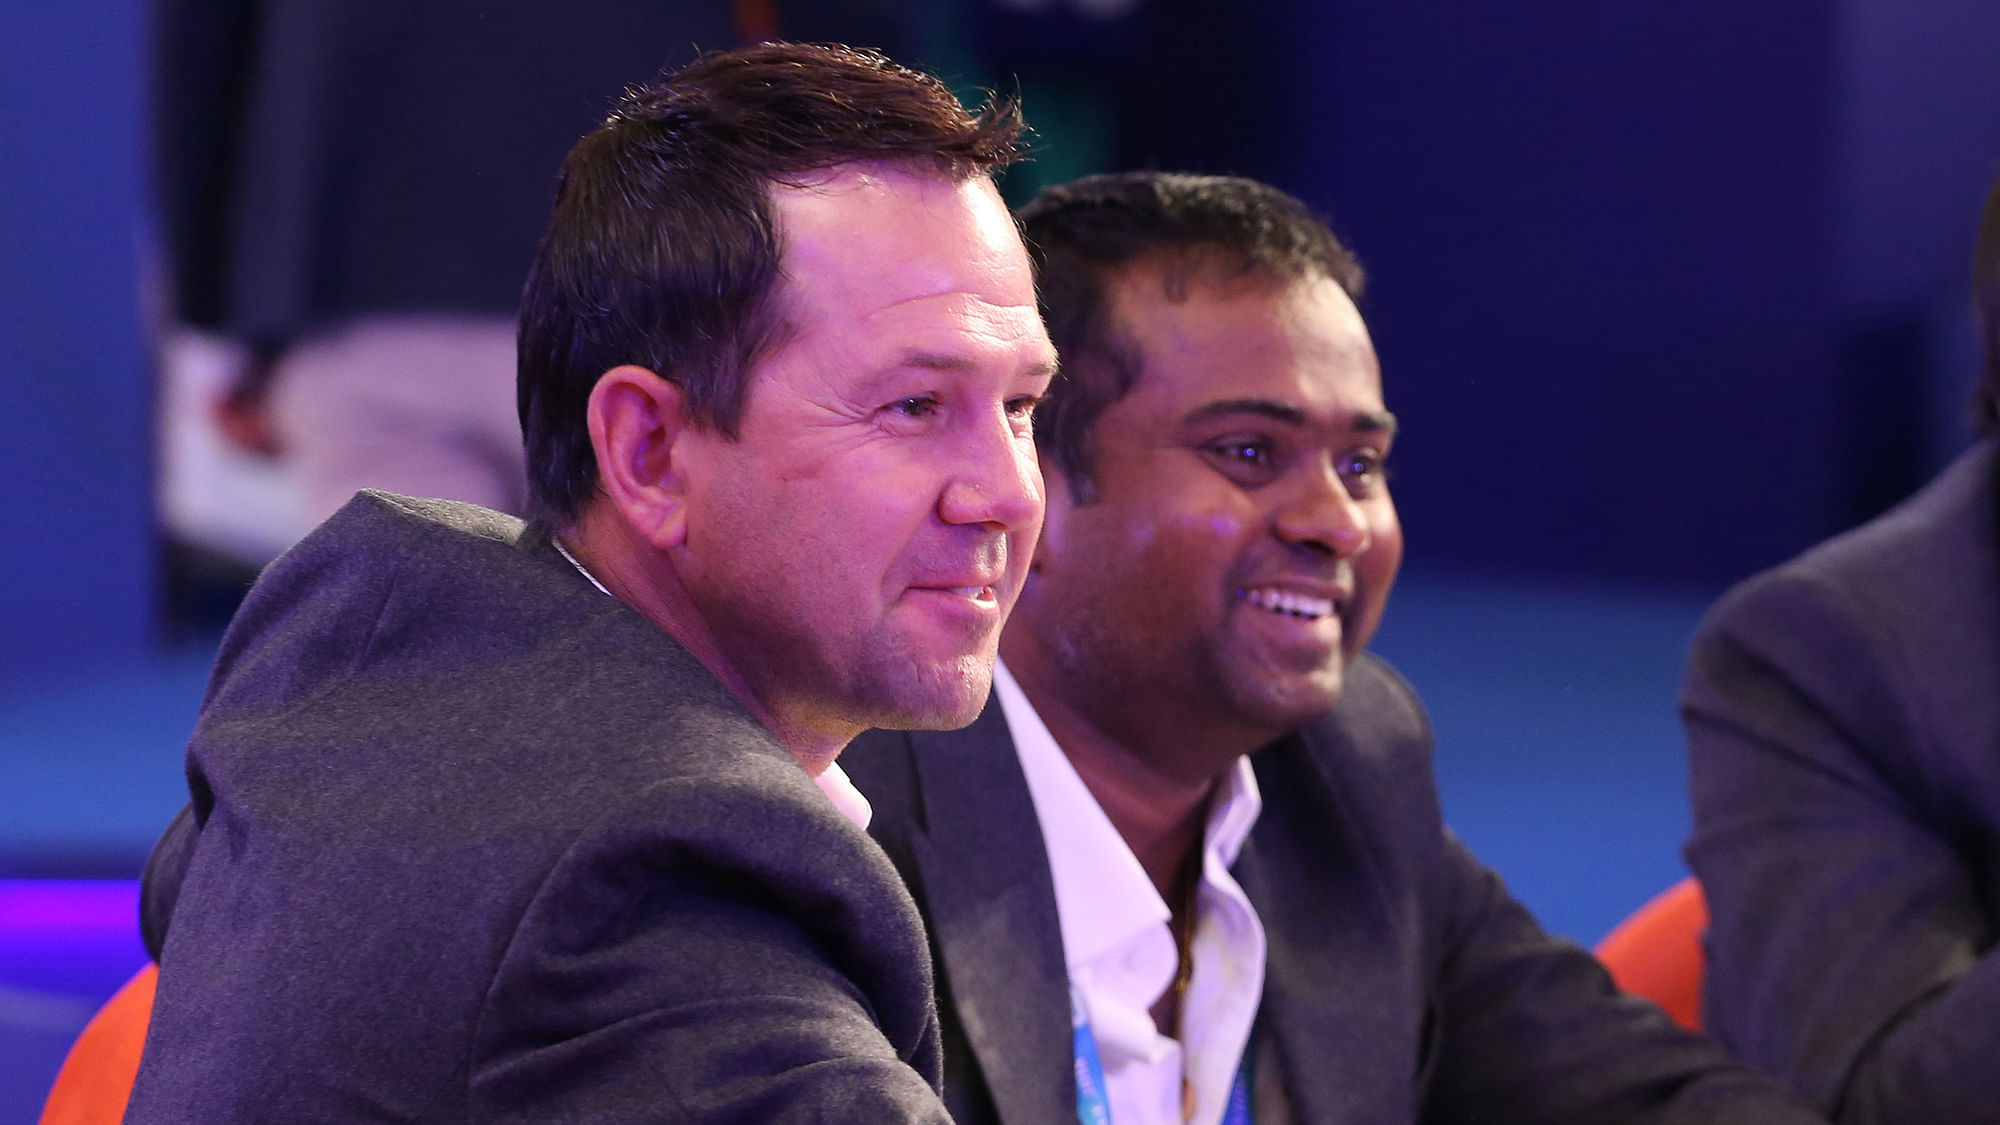 Delhi Daredevils’ coach Ricky Ponting reacts during the IPL 2018 Auction.&nbsp;